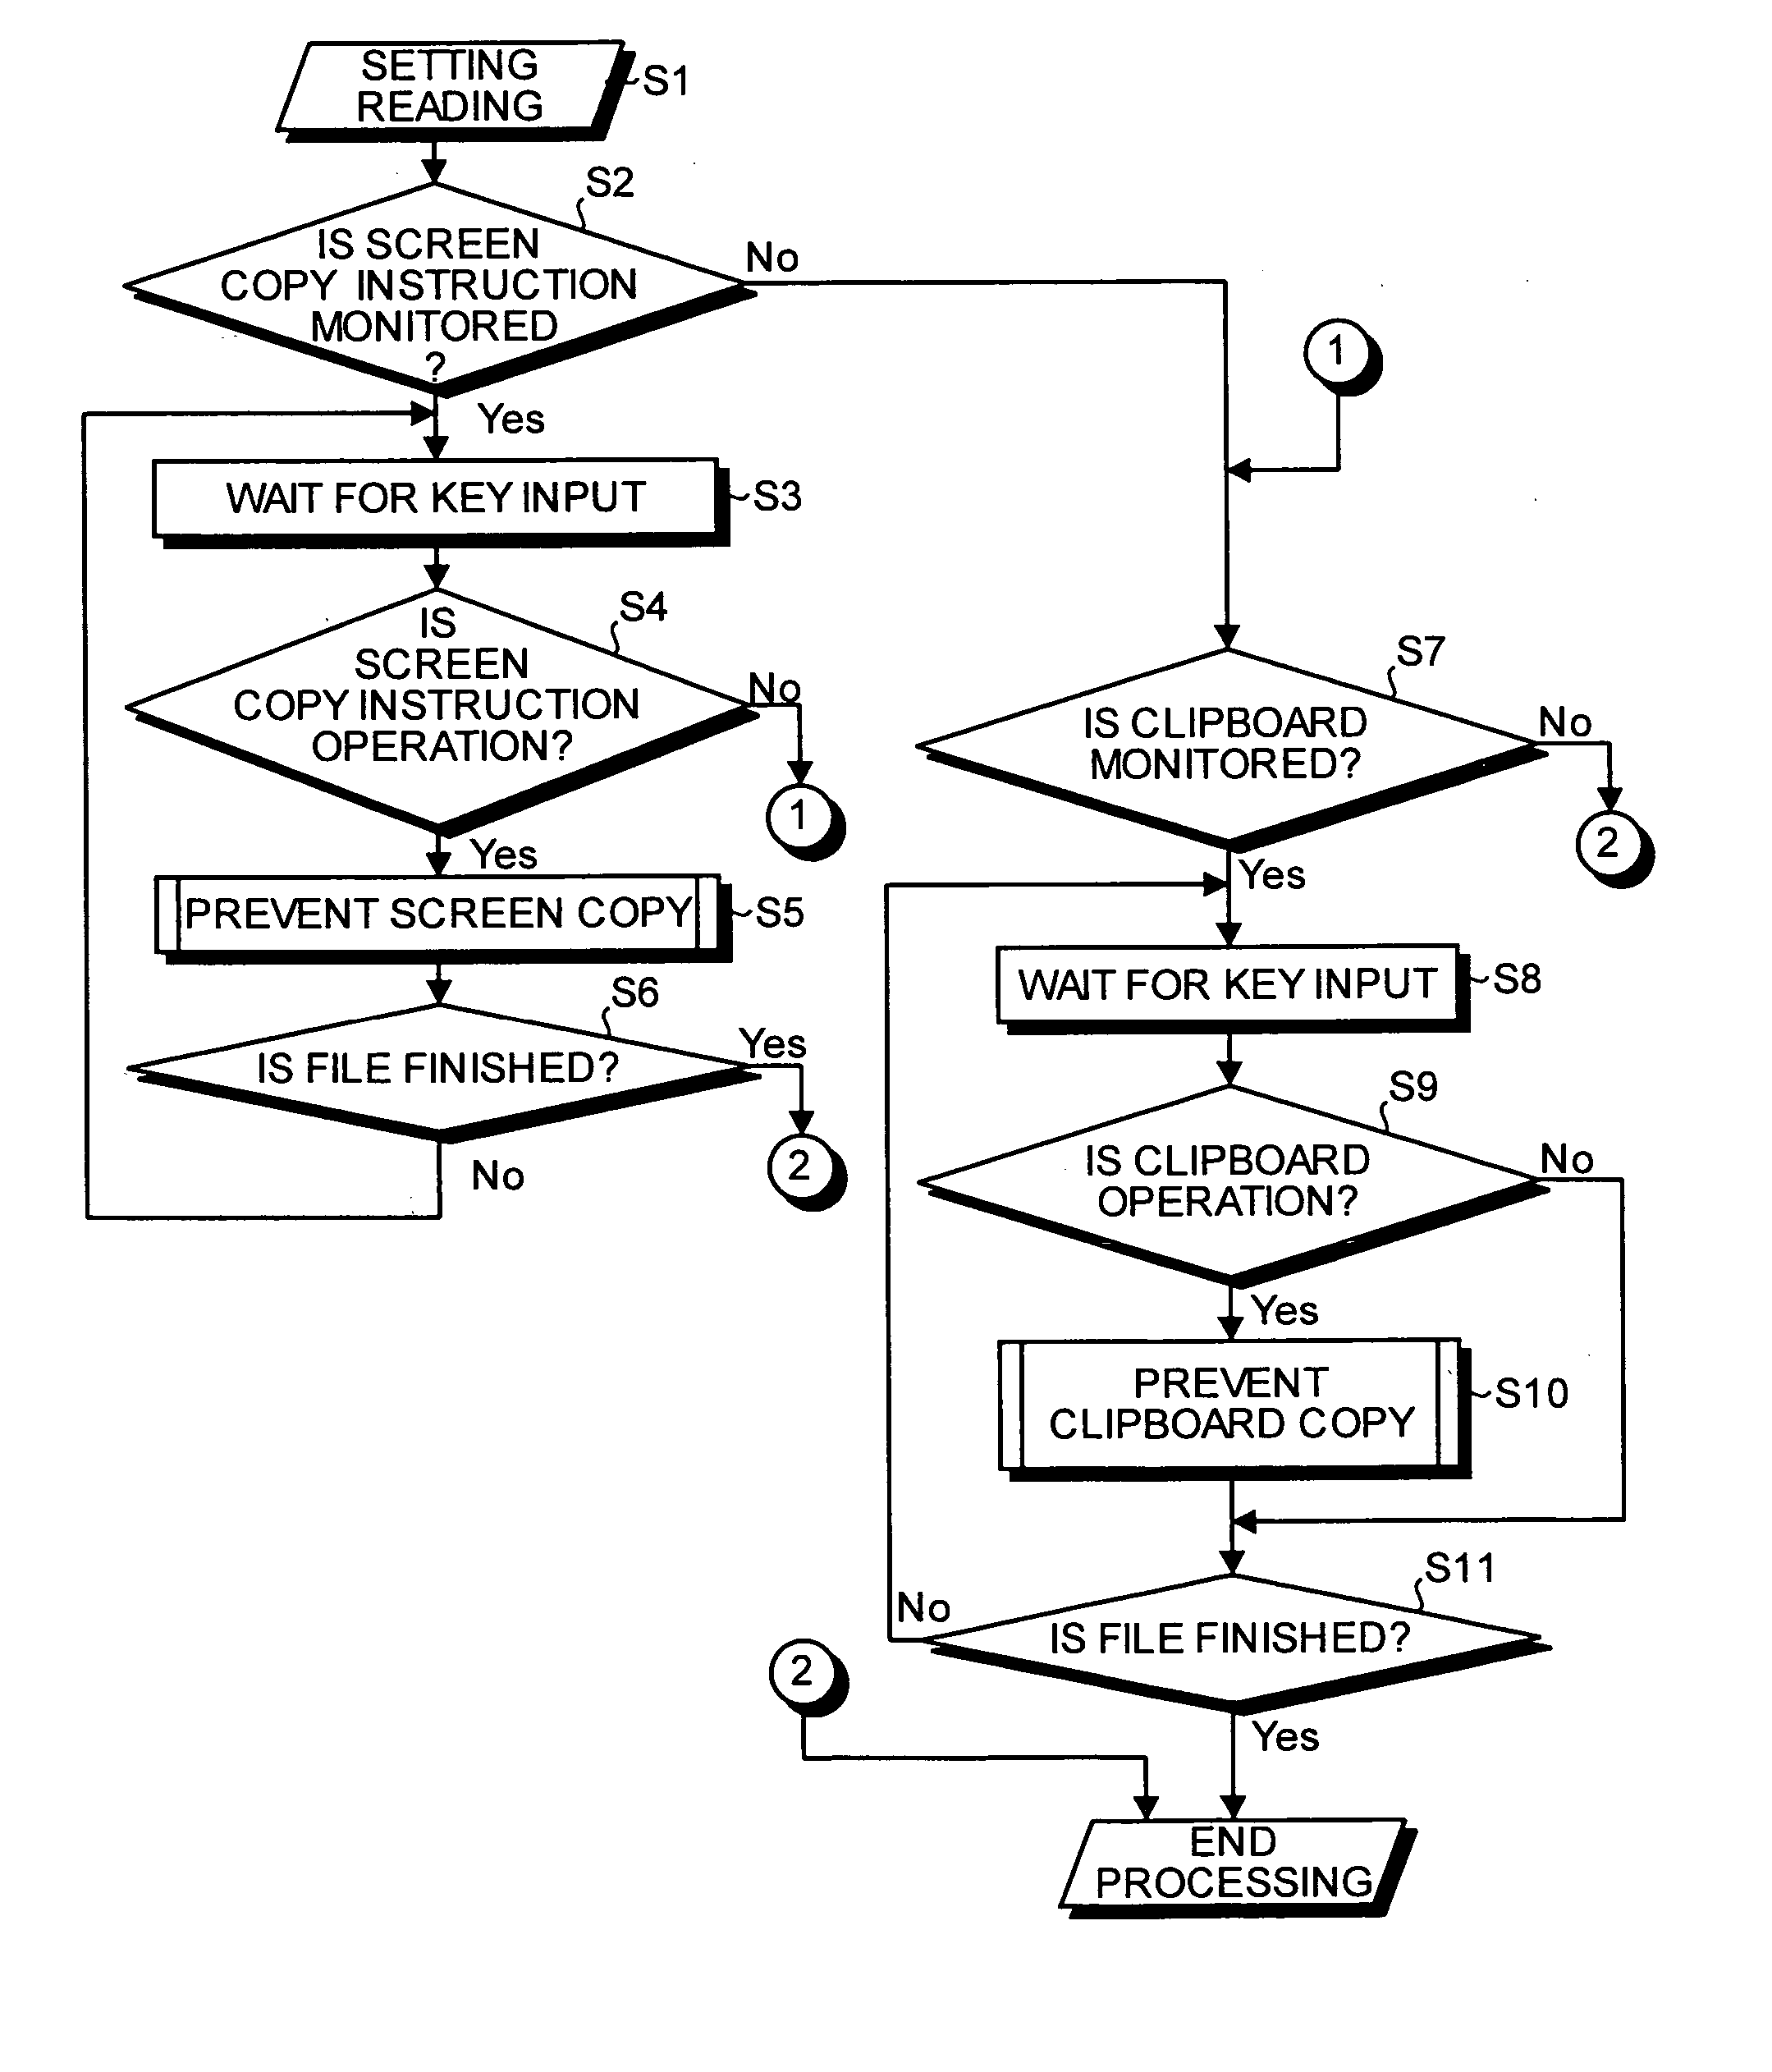 Apparatus, method and computer product for preventing copy of data